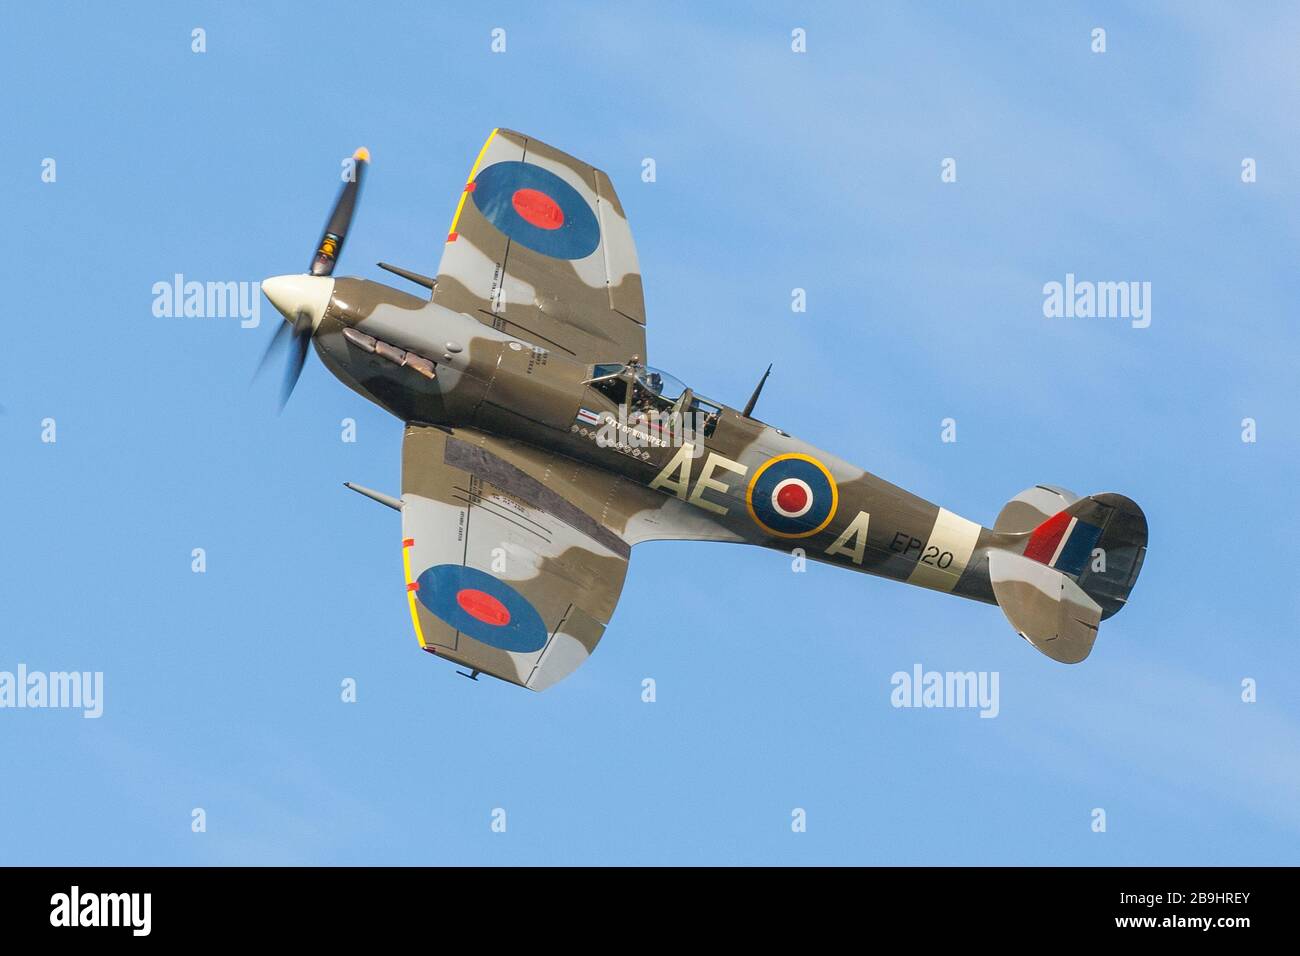 Spitfire Mkv High Resolution Stock Photography and Images - Alamy